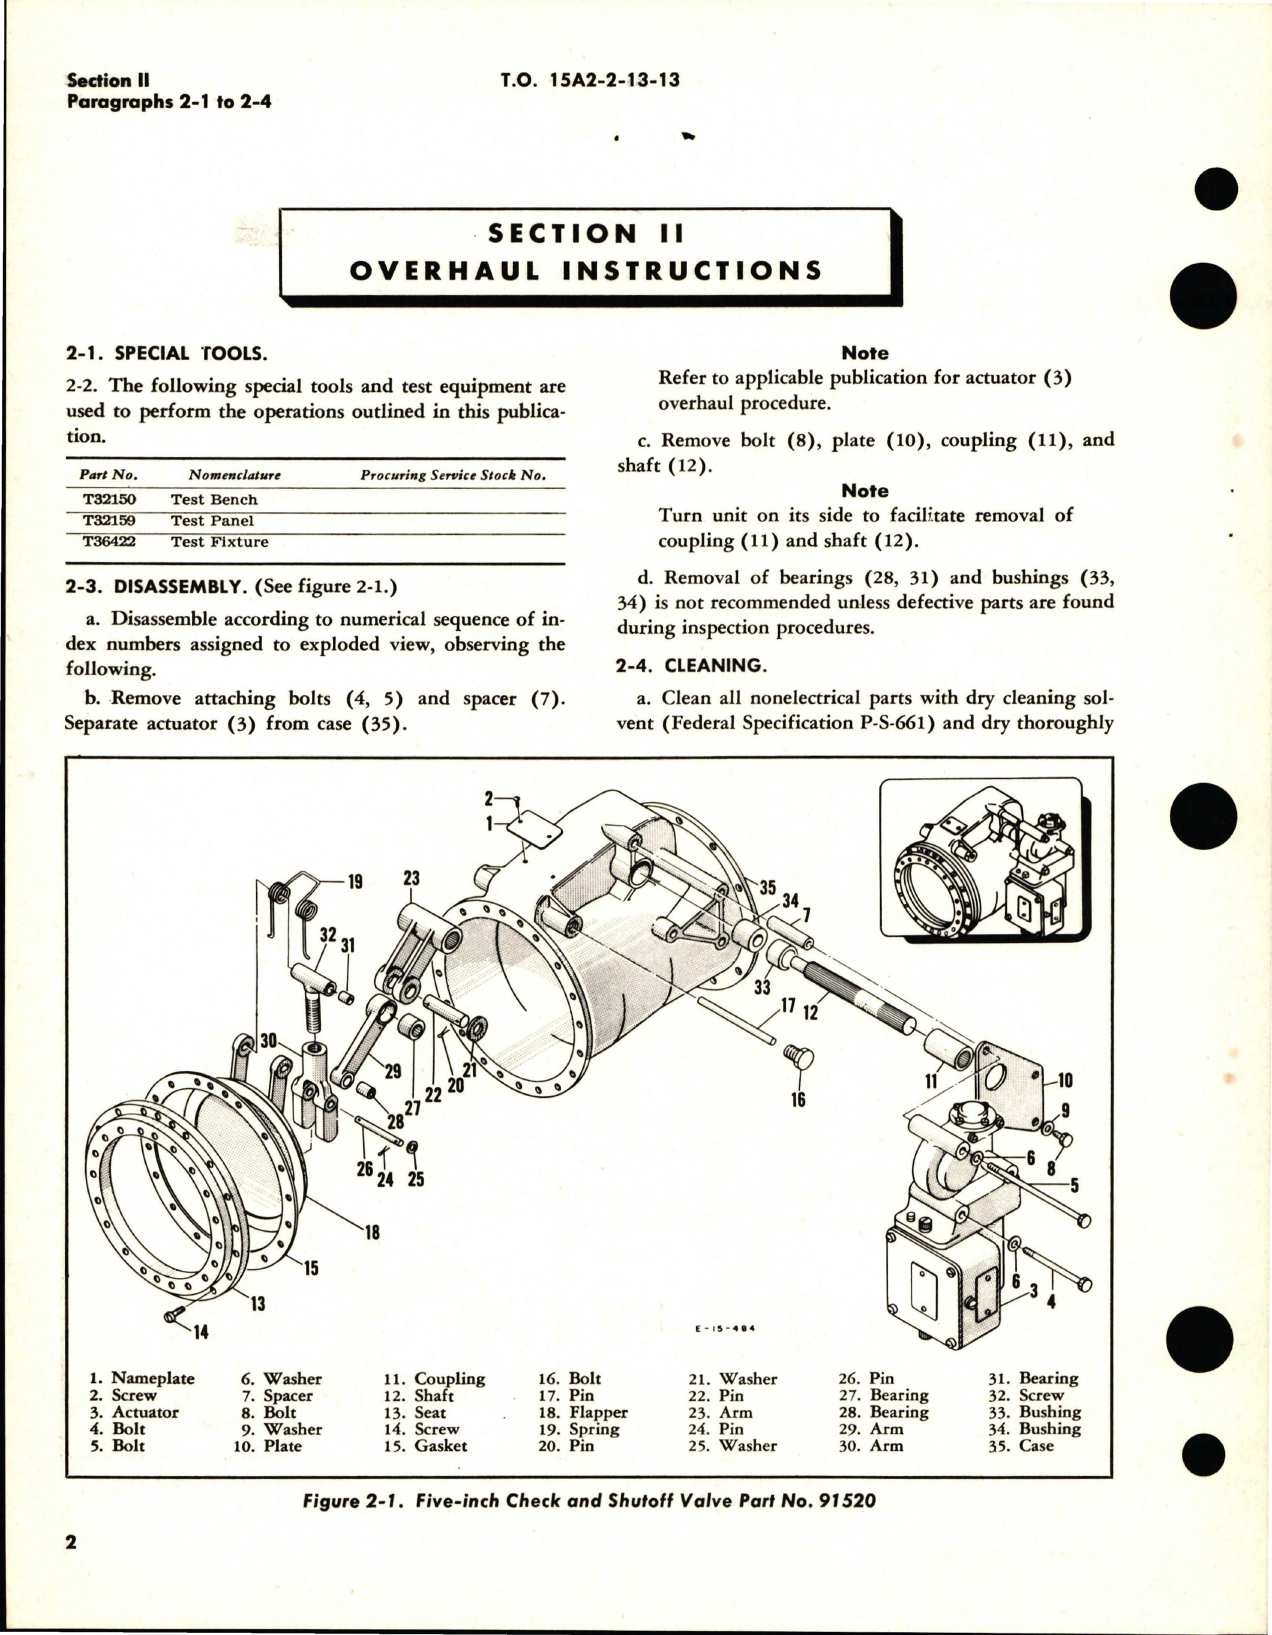 Sample page 6 from AirCorps Library document: Overhaul Instructions for Check and Shutoff Valves 